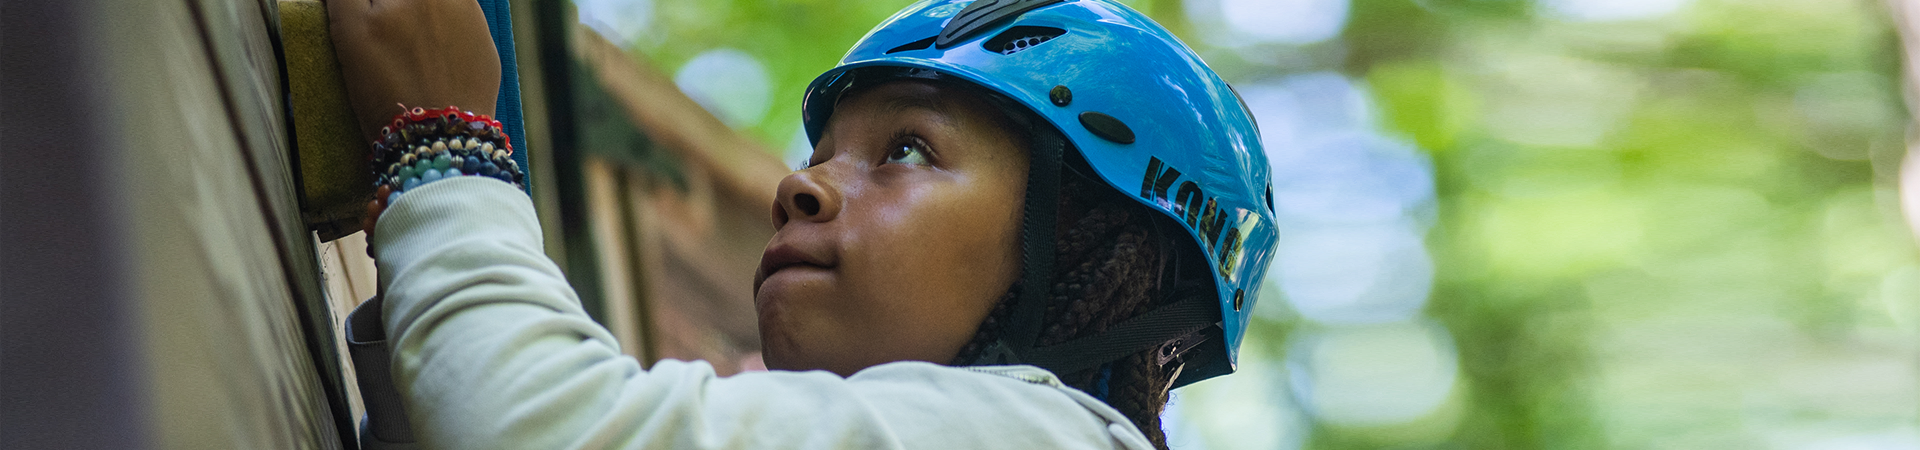  A younger Girl Scout with a helmet on at the high ropes course at camp, surrounded by other Girl Scouts and counselors 